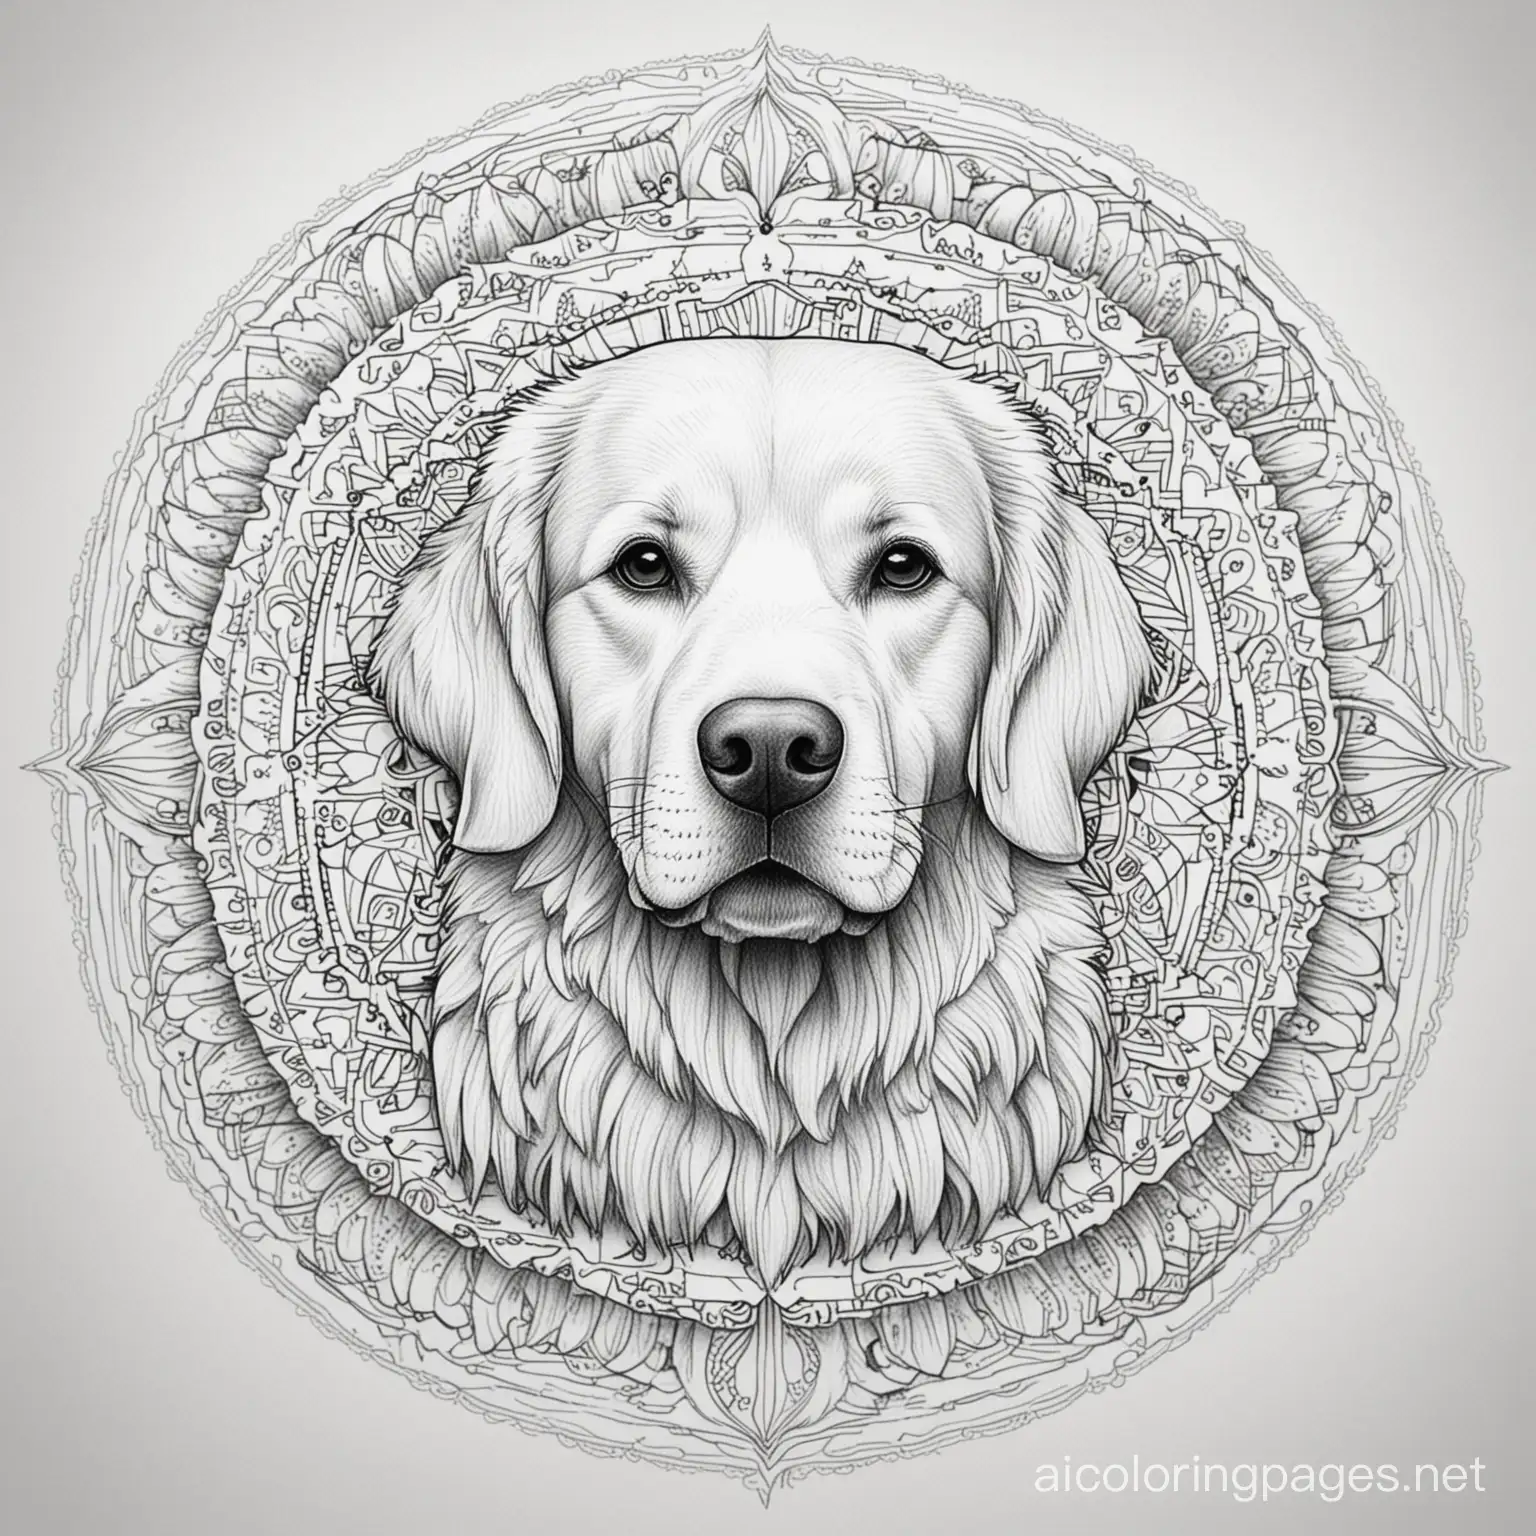 Golden Retriver dog mandala

, Coloring Page, black and white, line art, white background, Simplicity, Ample White Space. The background of the coloring page is plain white to make it easy for young children to color within the lines. The outlines of all the subjects are easy to distinguish, making it simple for kids to color without too much difficulty